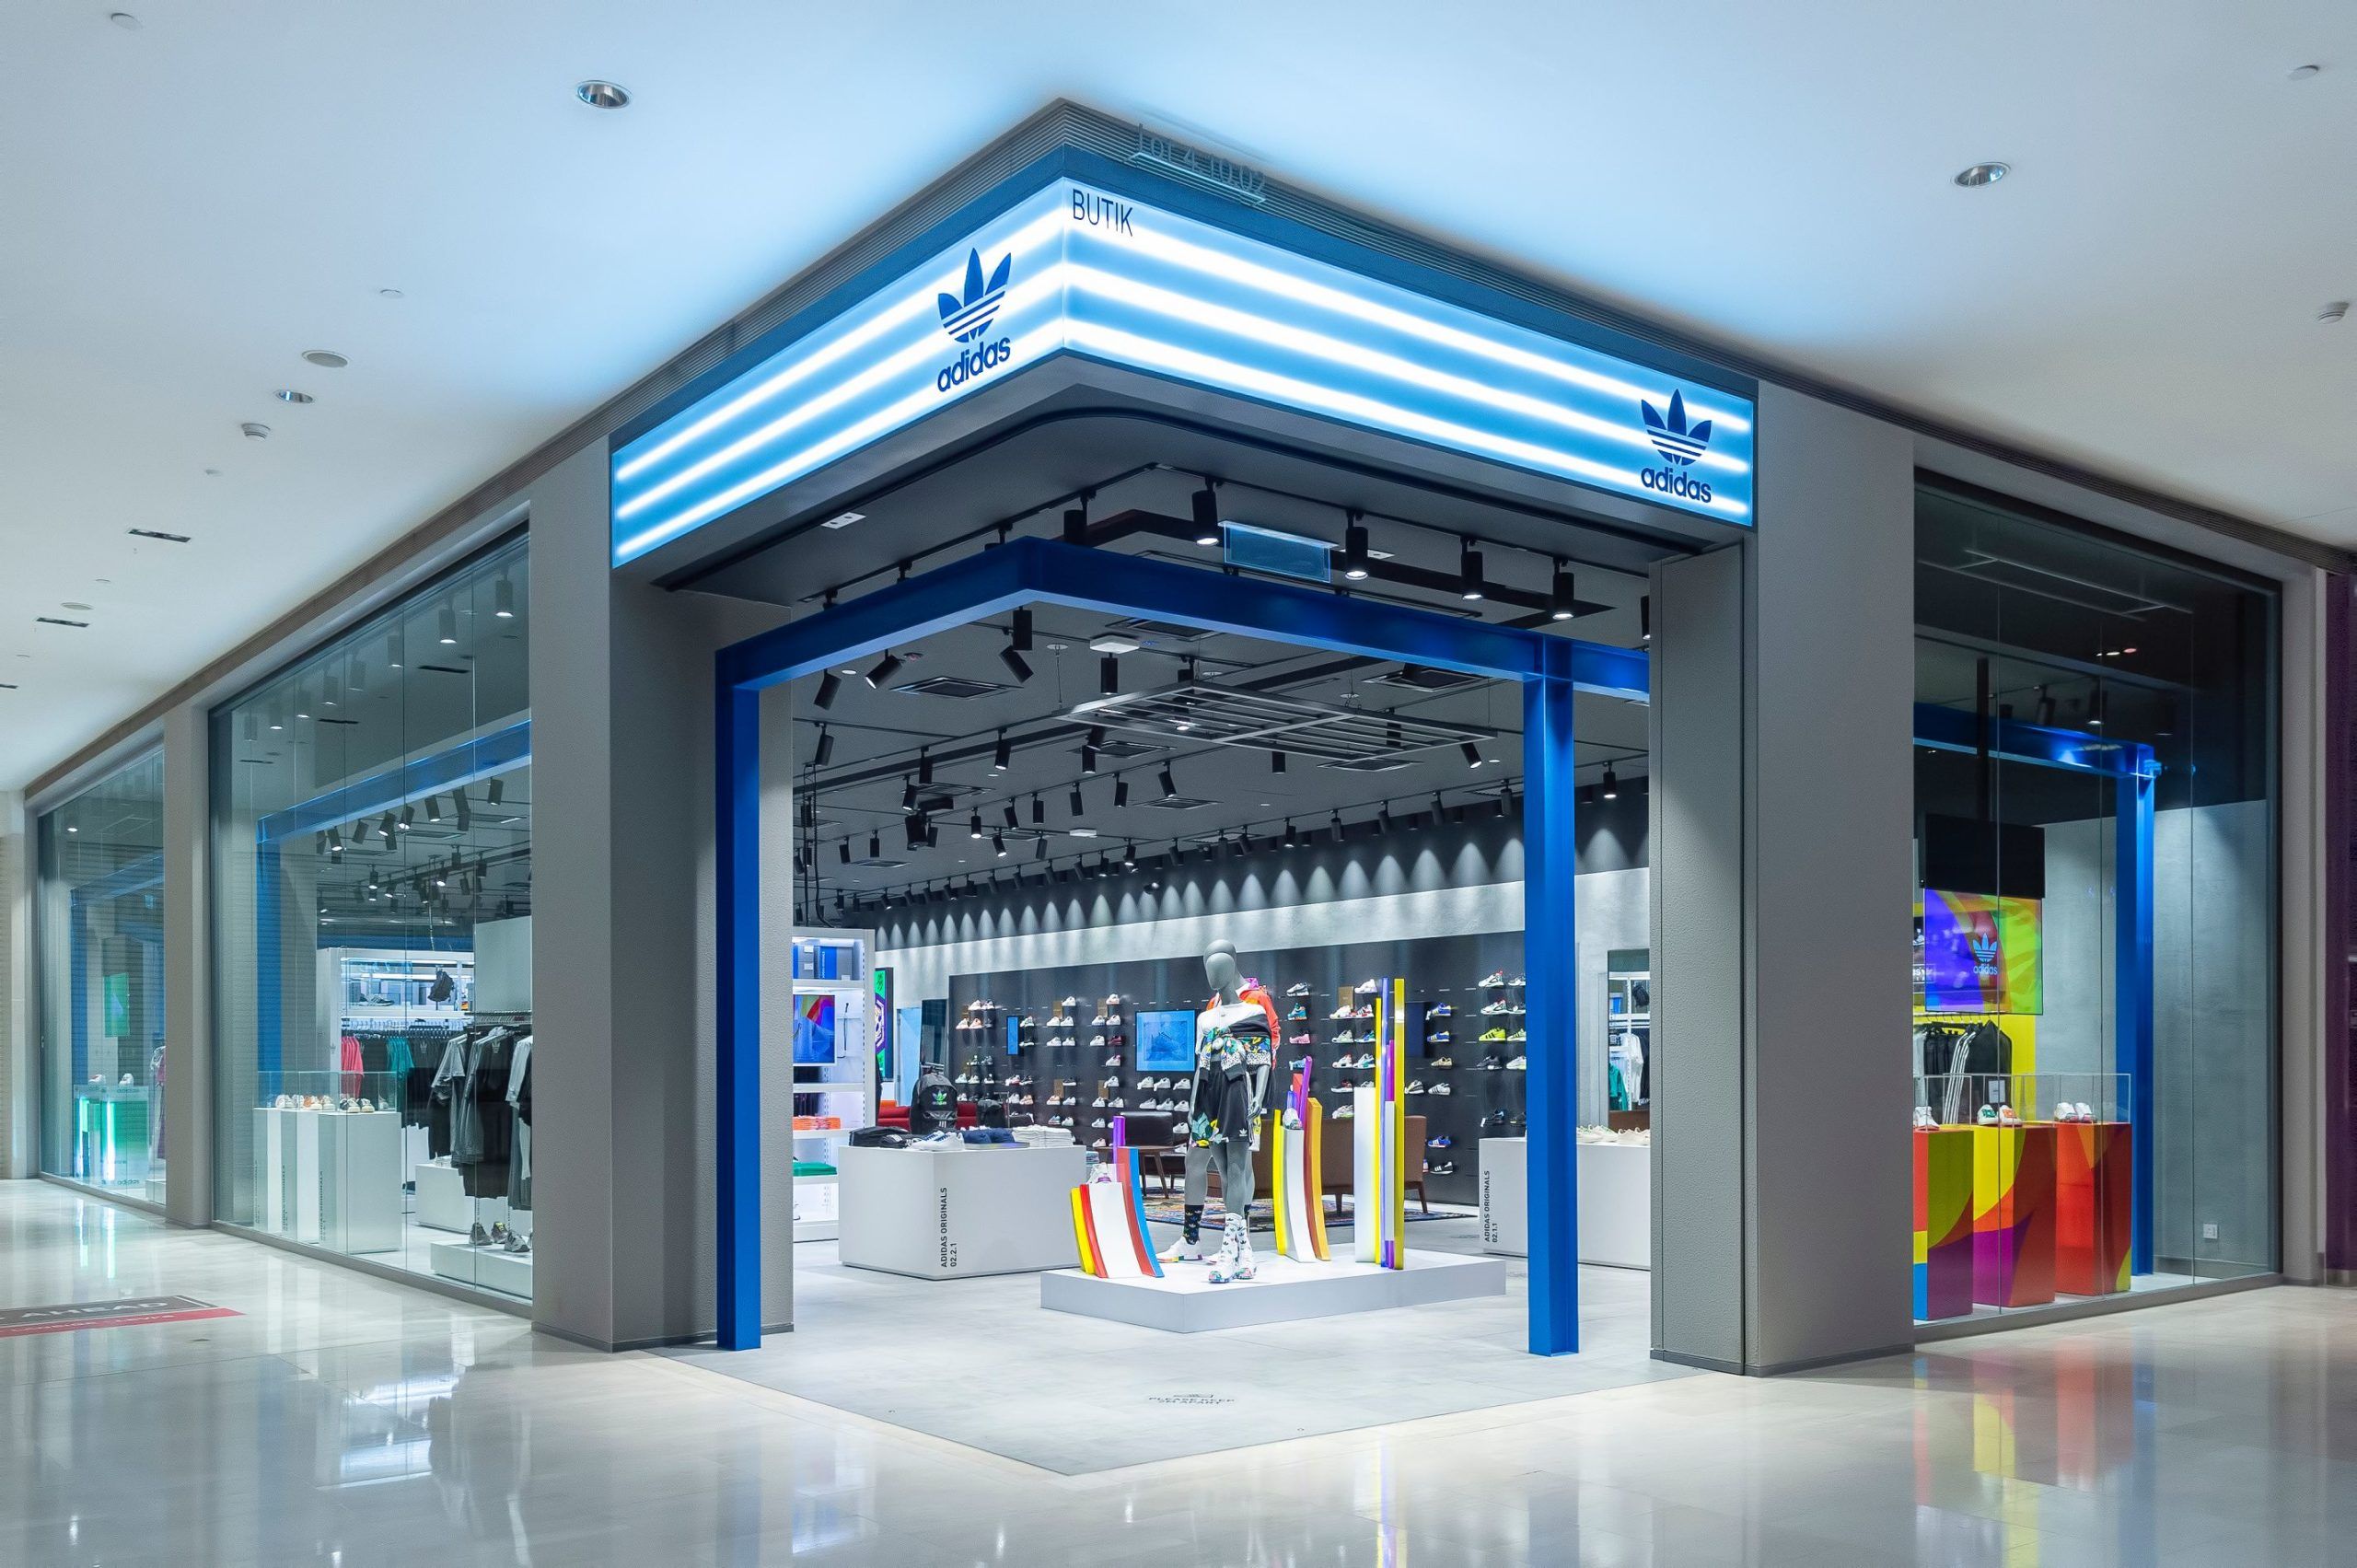 The new Adidas Originals flagship store Pavilion KL is its largest yet